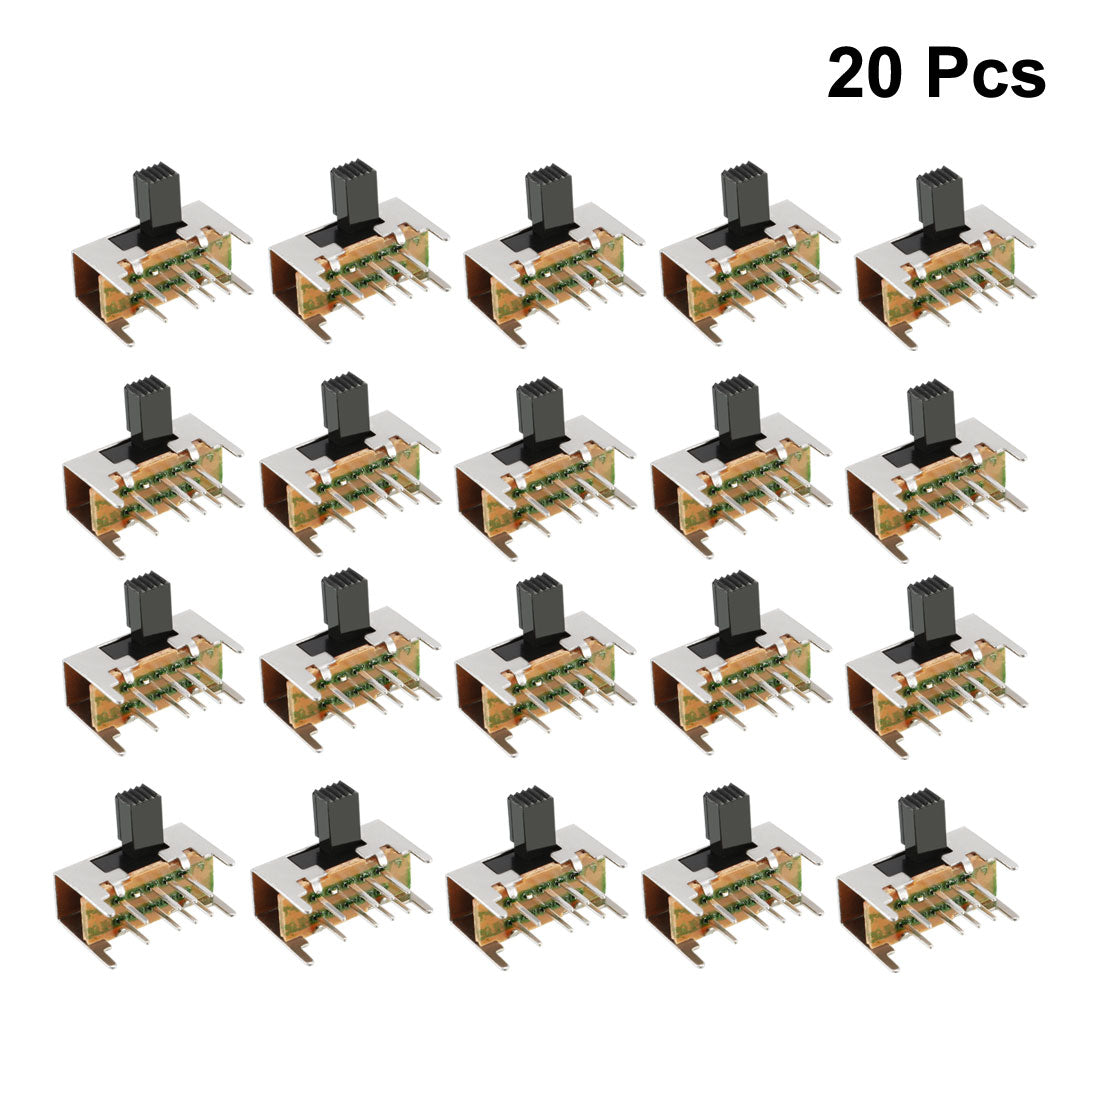 uxcell Uxcell 20Pcs 6mm Horizontal Slide Switch DP3T 2P3T 8 Terminals PCB Panel Latching